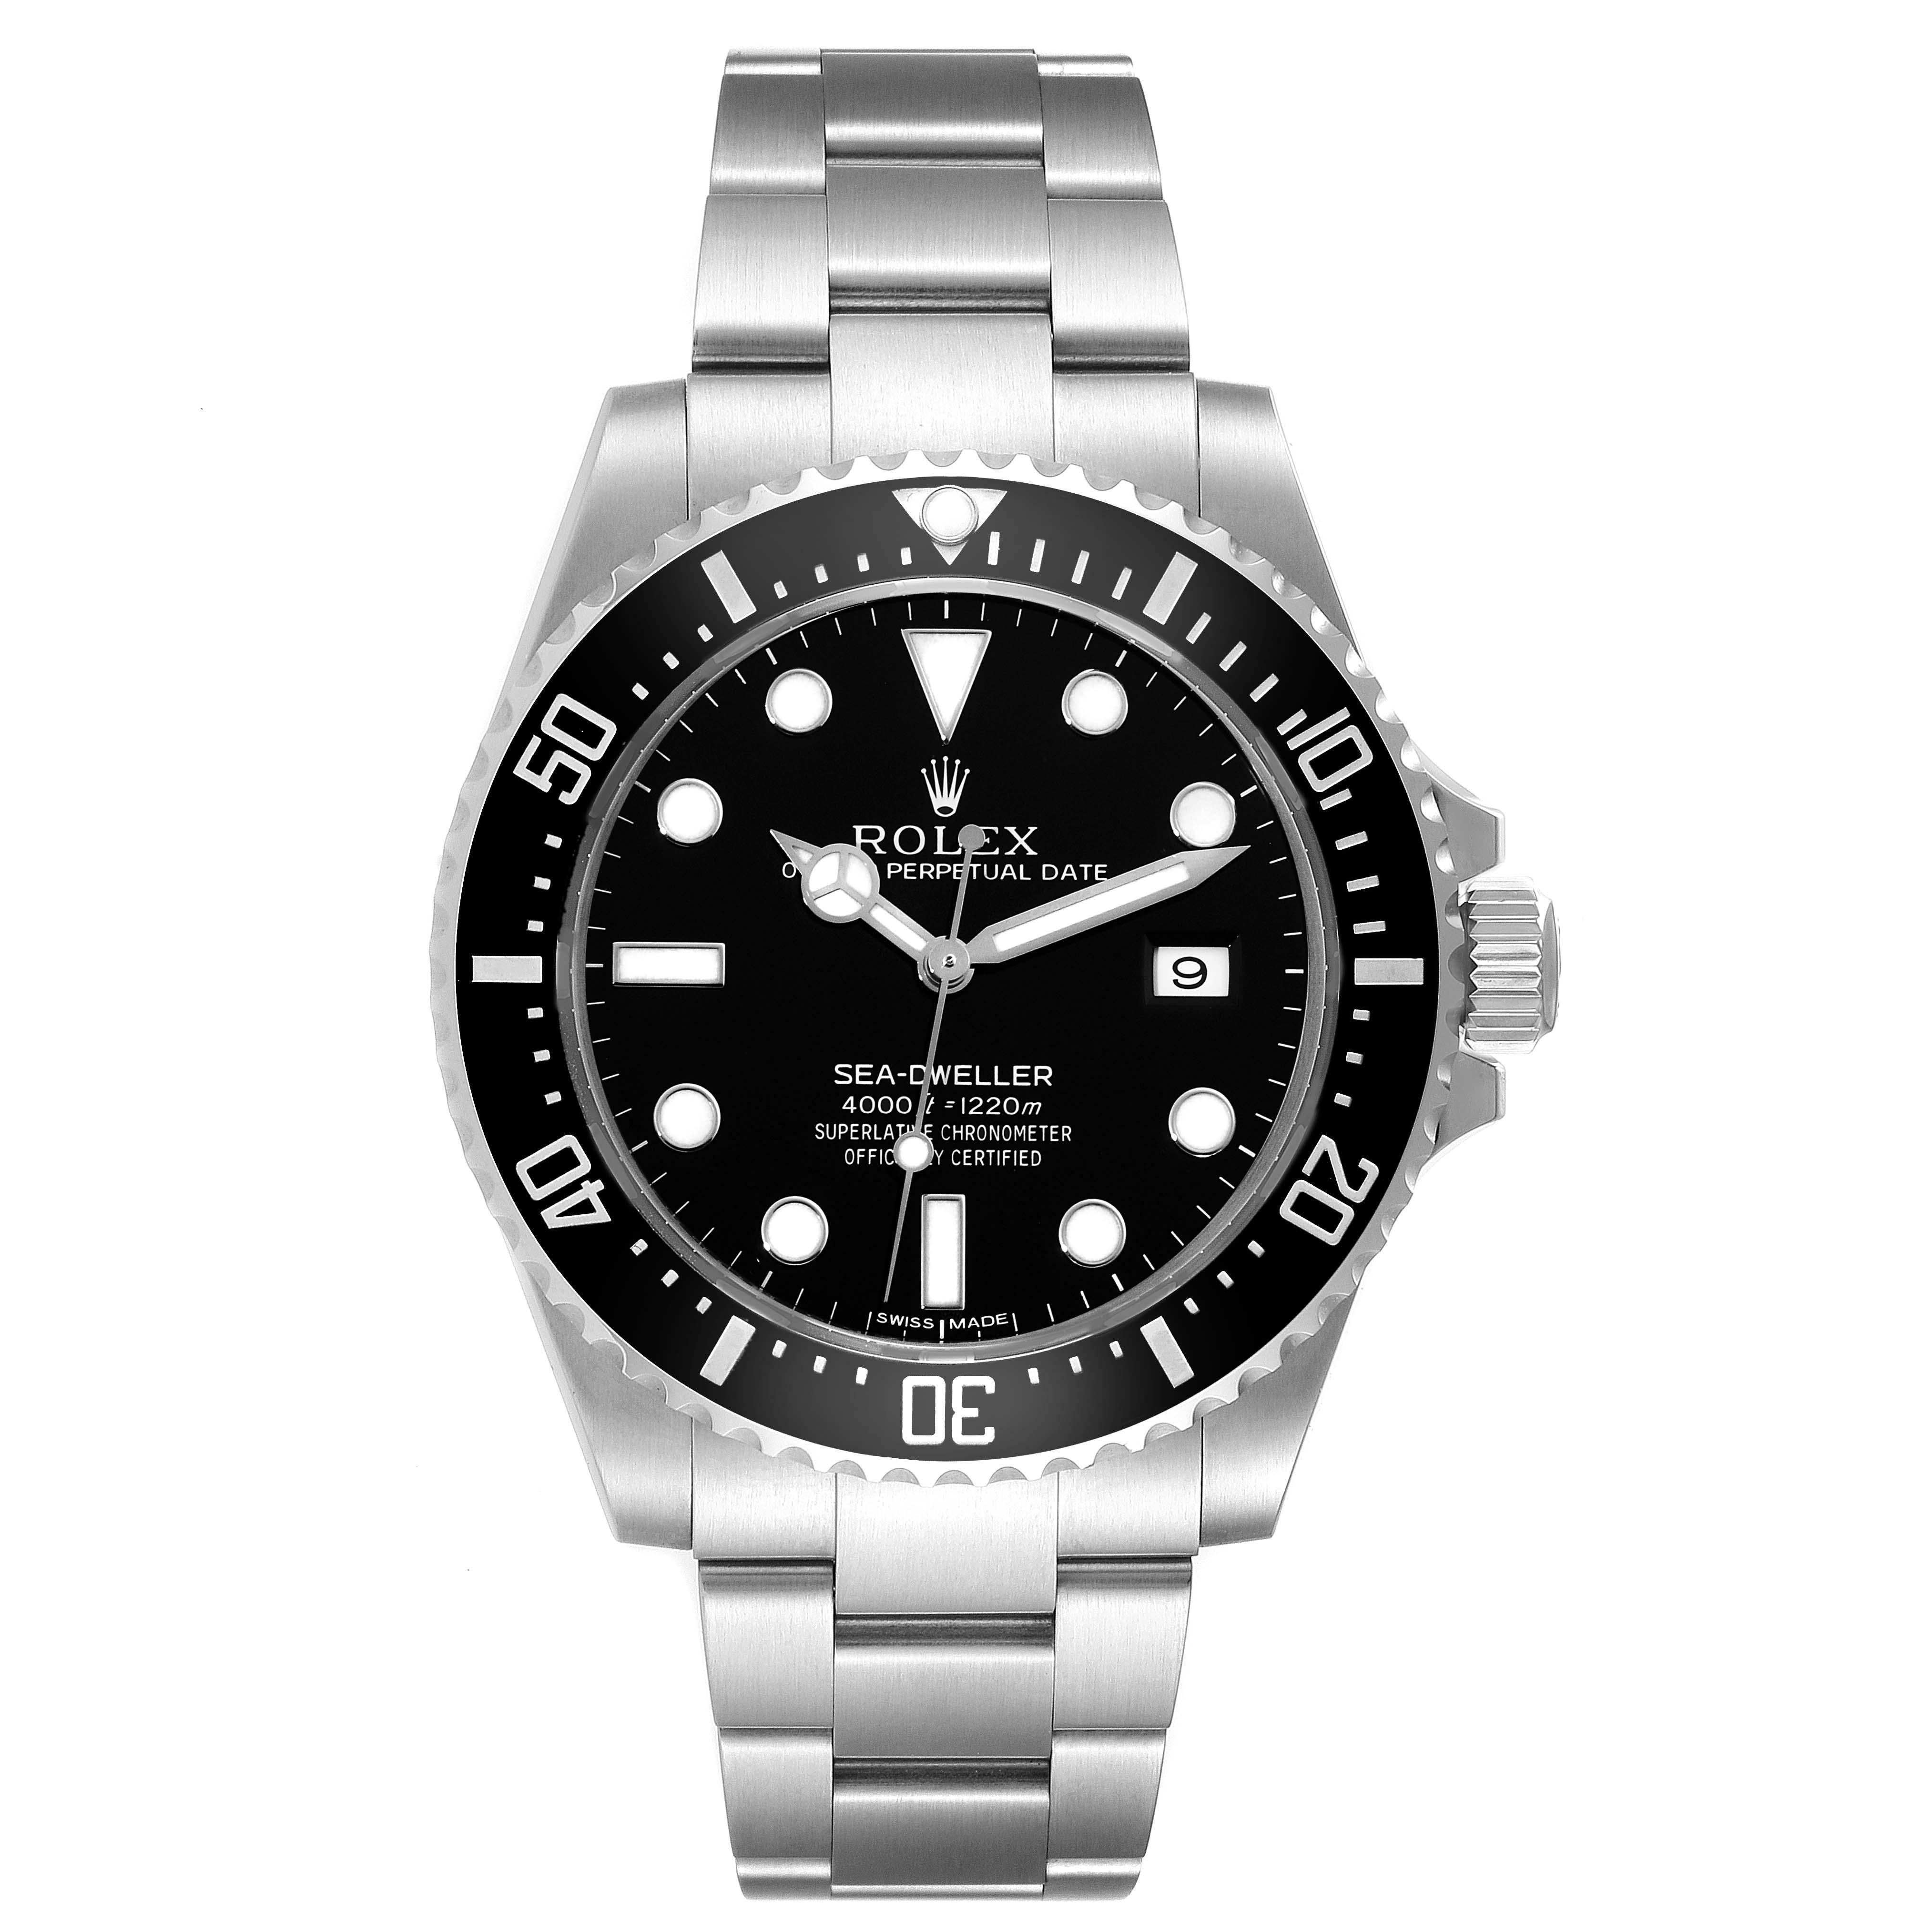 Rolex Seadweller 4000 Automatic Steel Mens Watch 116600 Box Card. Officially certified chronometer automatic self-winding movement. Stainless steel oyster case 40.0 mm in diameter. Rolex logo on a crown. Ceramic unidirectional rotating bezel.